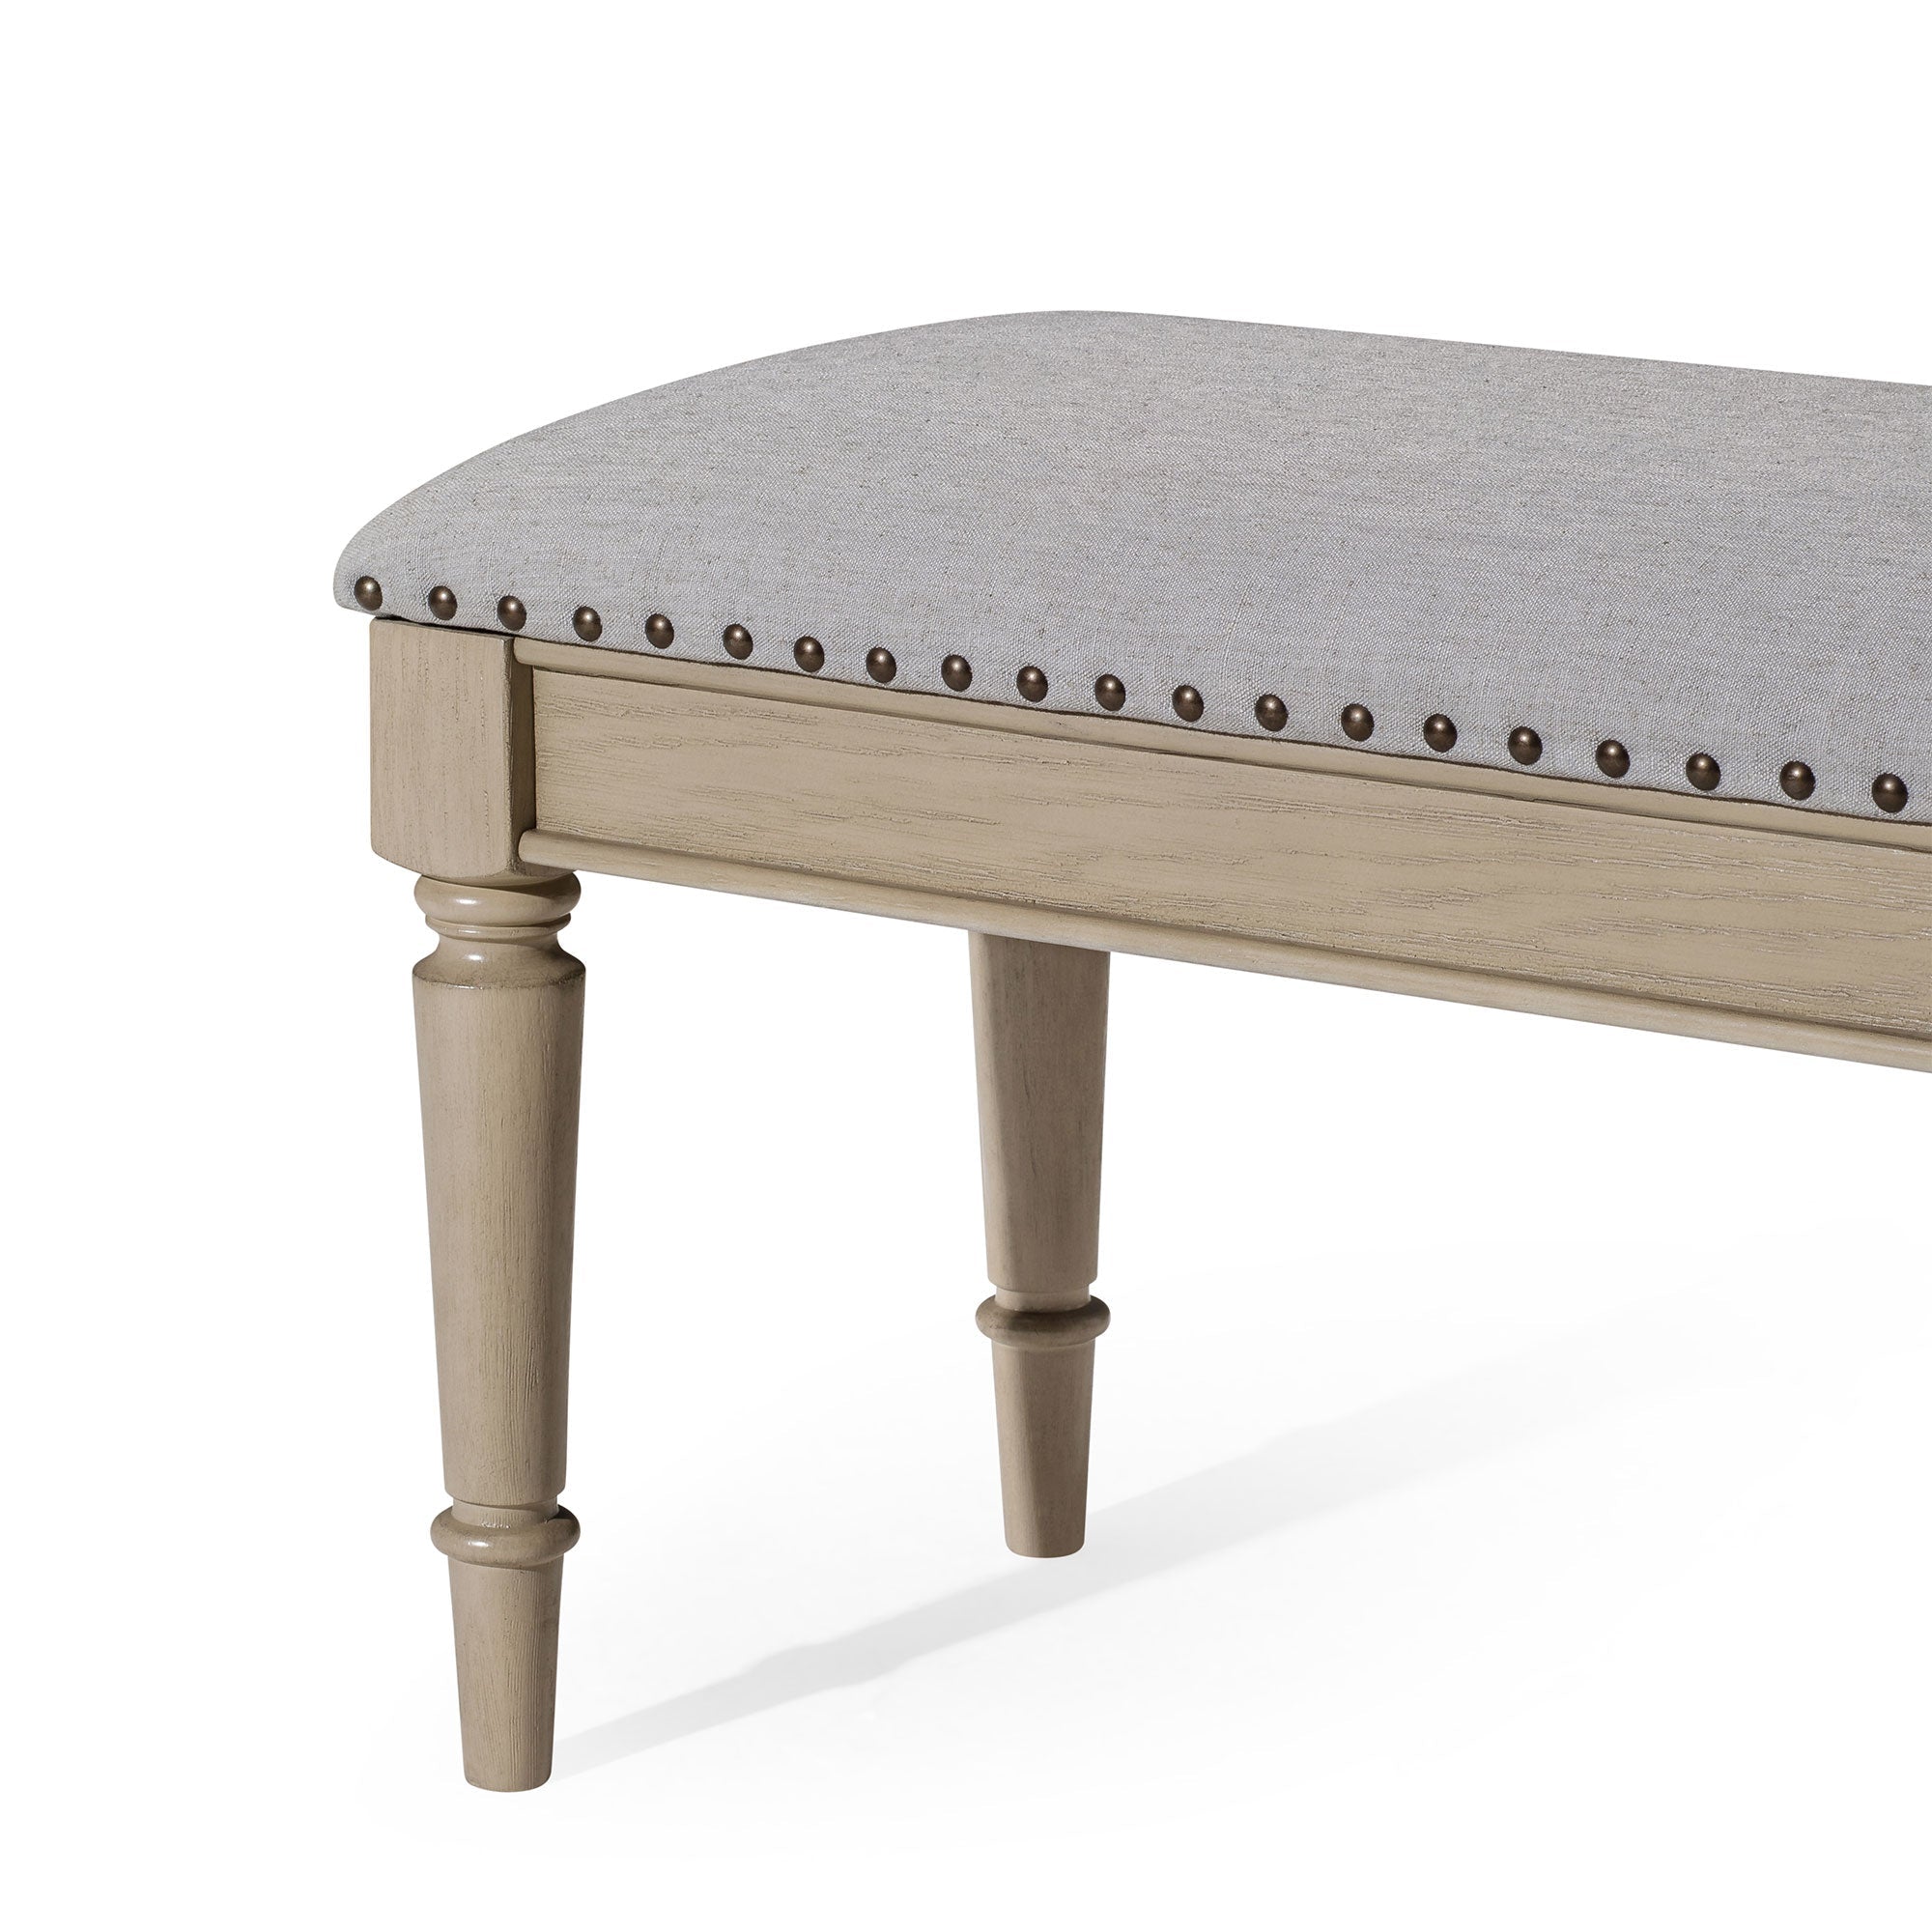 Elizabeth Classical Upholstered Wooden Bench in Antiqued Grey Finish in Ottomans & Benches by Maven Lane